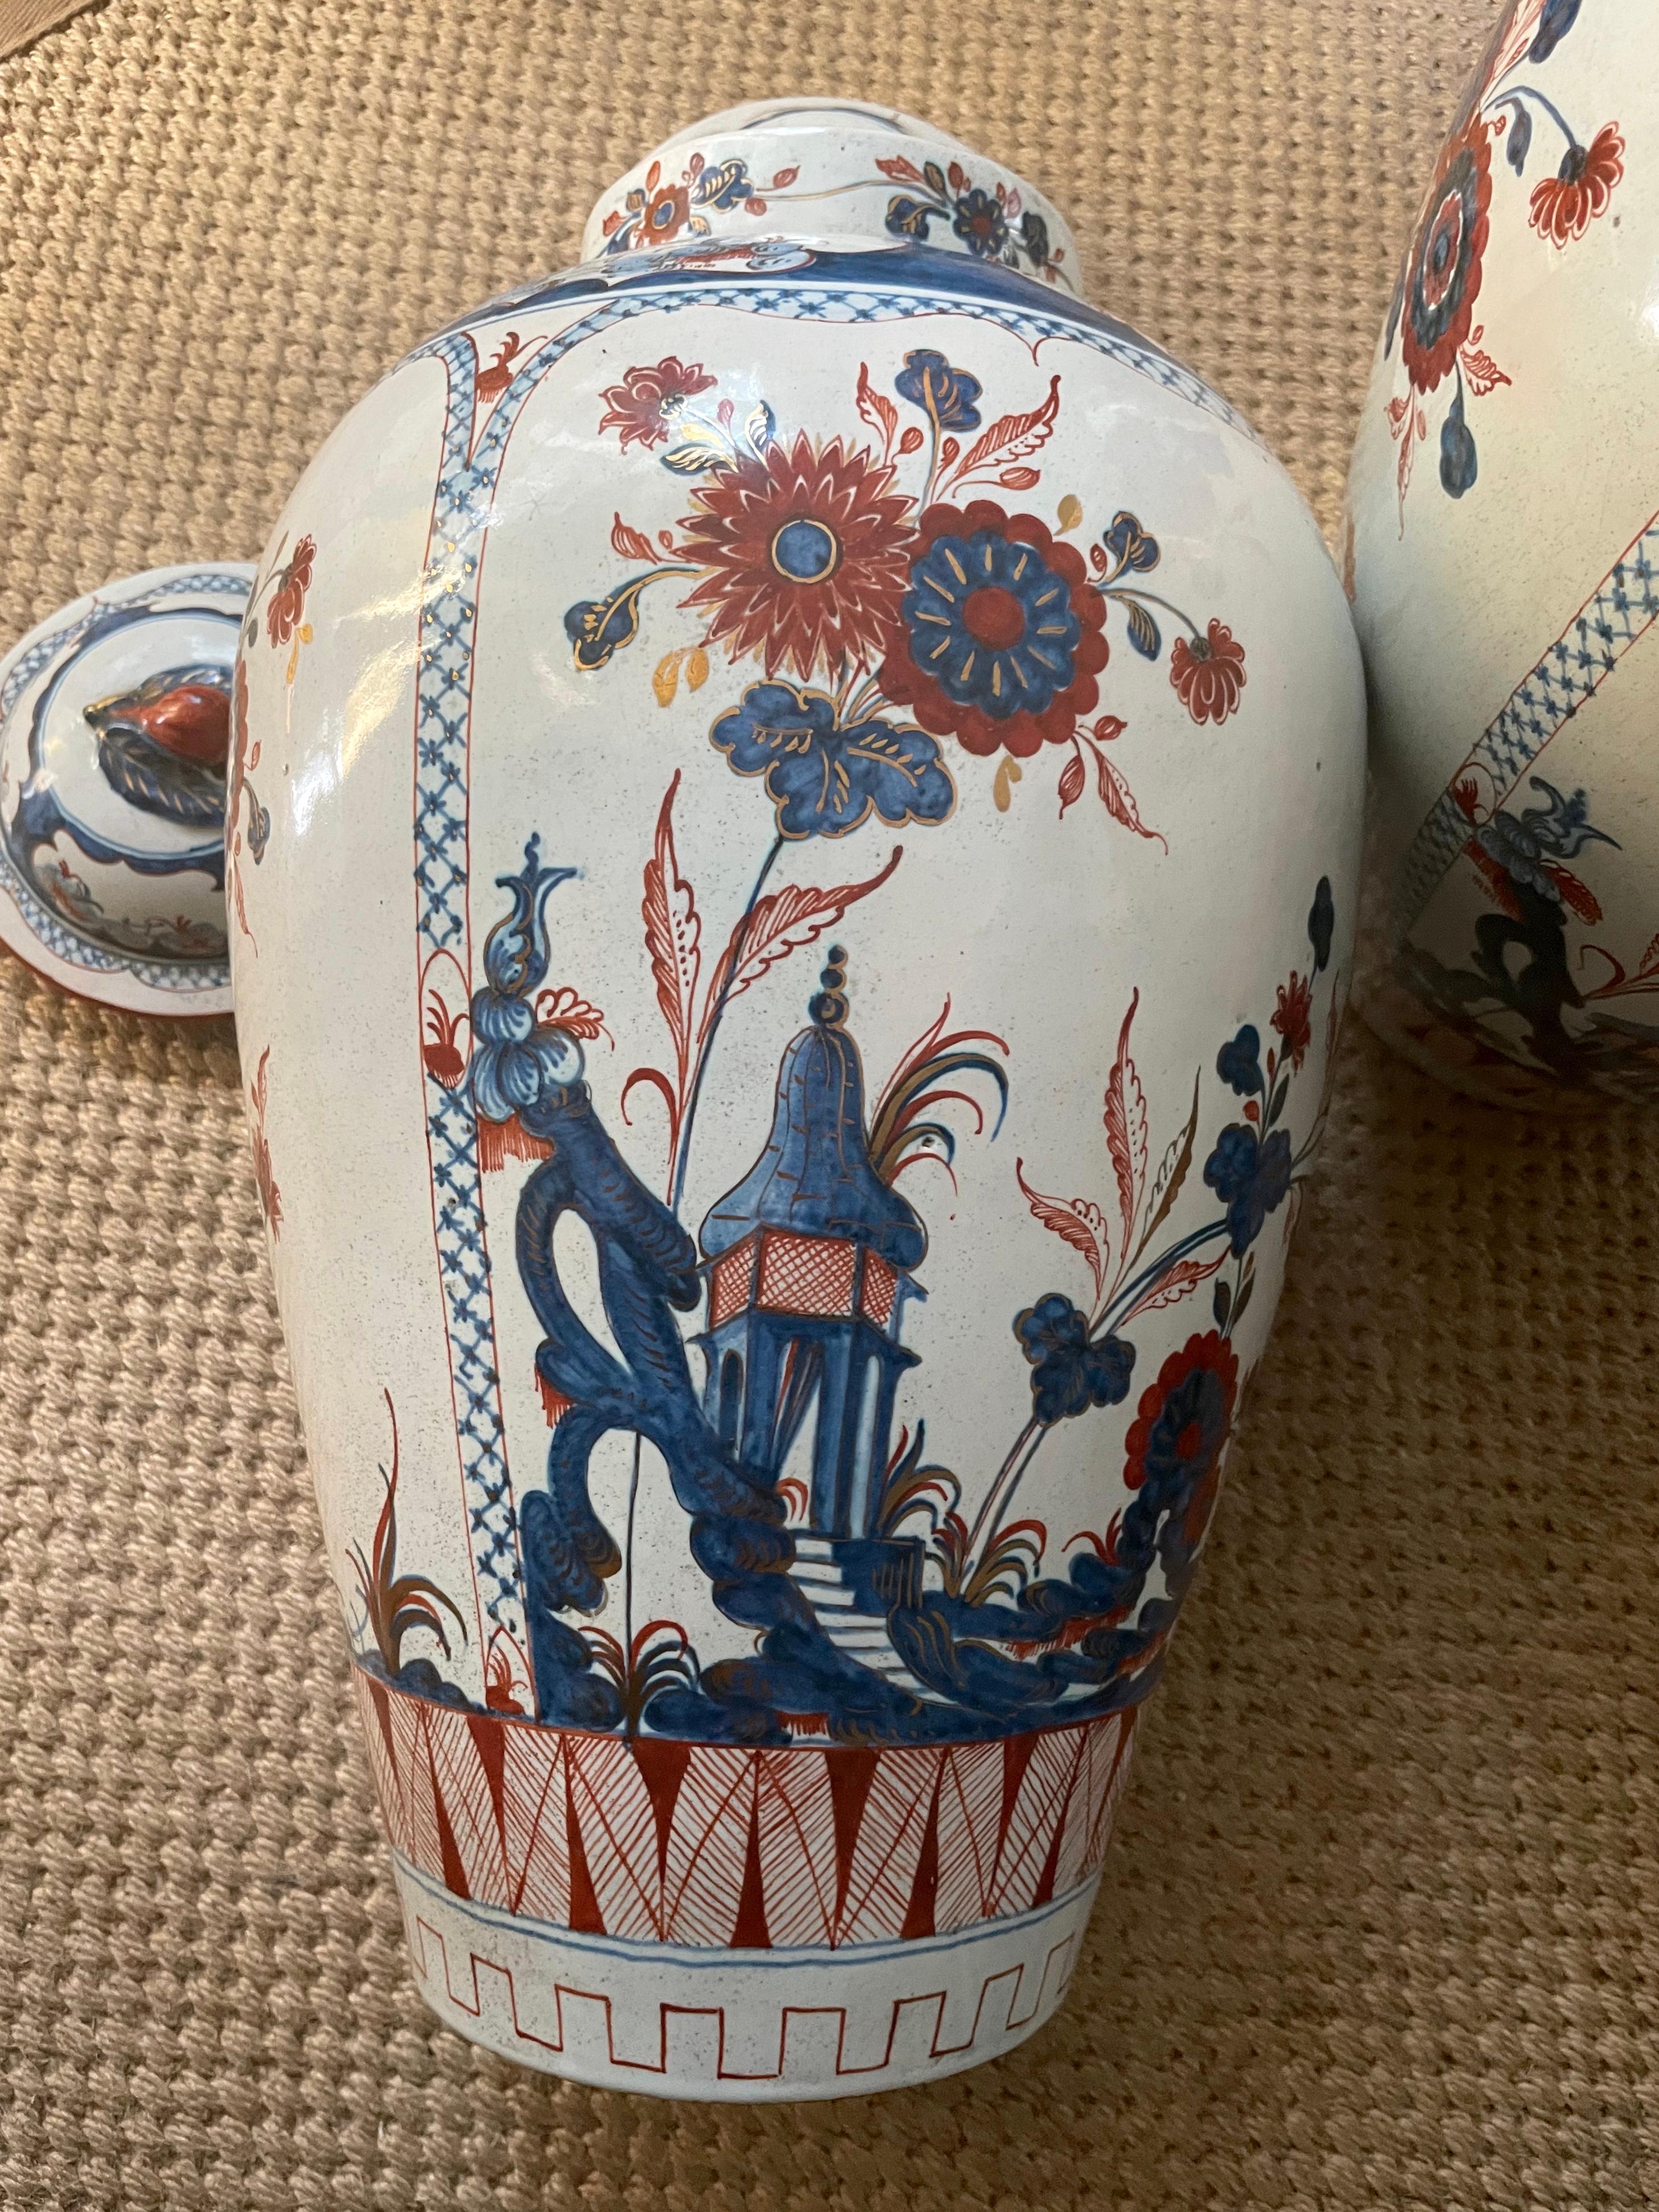 Pair blue and white chinoserie faiance vases. Pair large chinoiserie painted vases in Imari palette of blues, iron red, and gilding on cream ground with pagodas, flowers, and stylized fencing after the Doccia pattern with fruit knopfed finial lids.